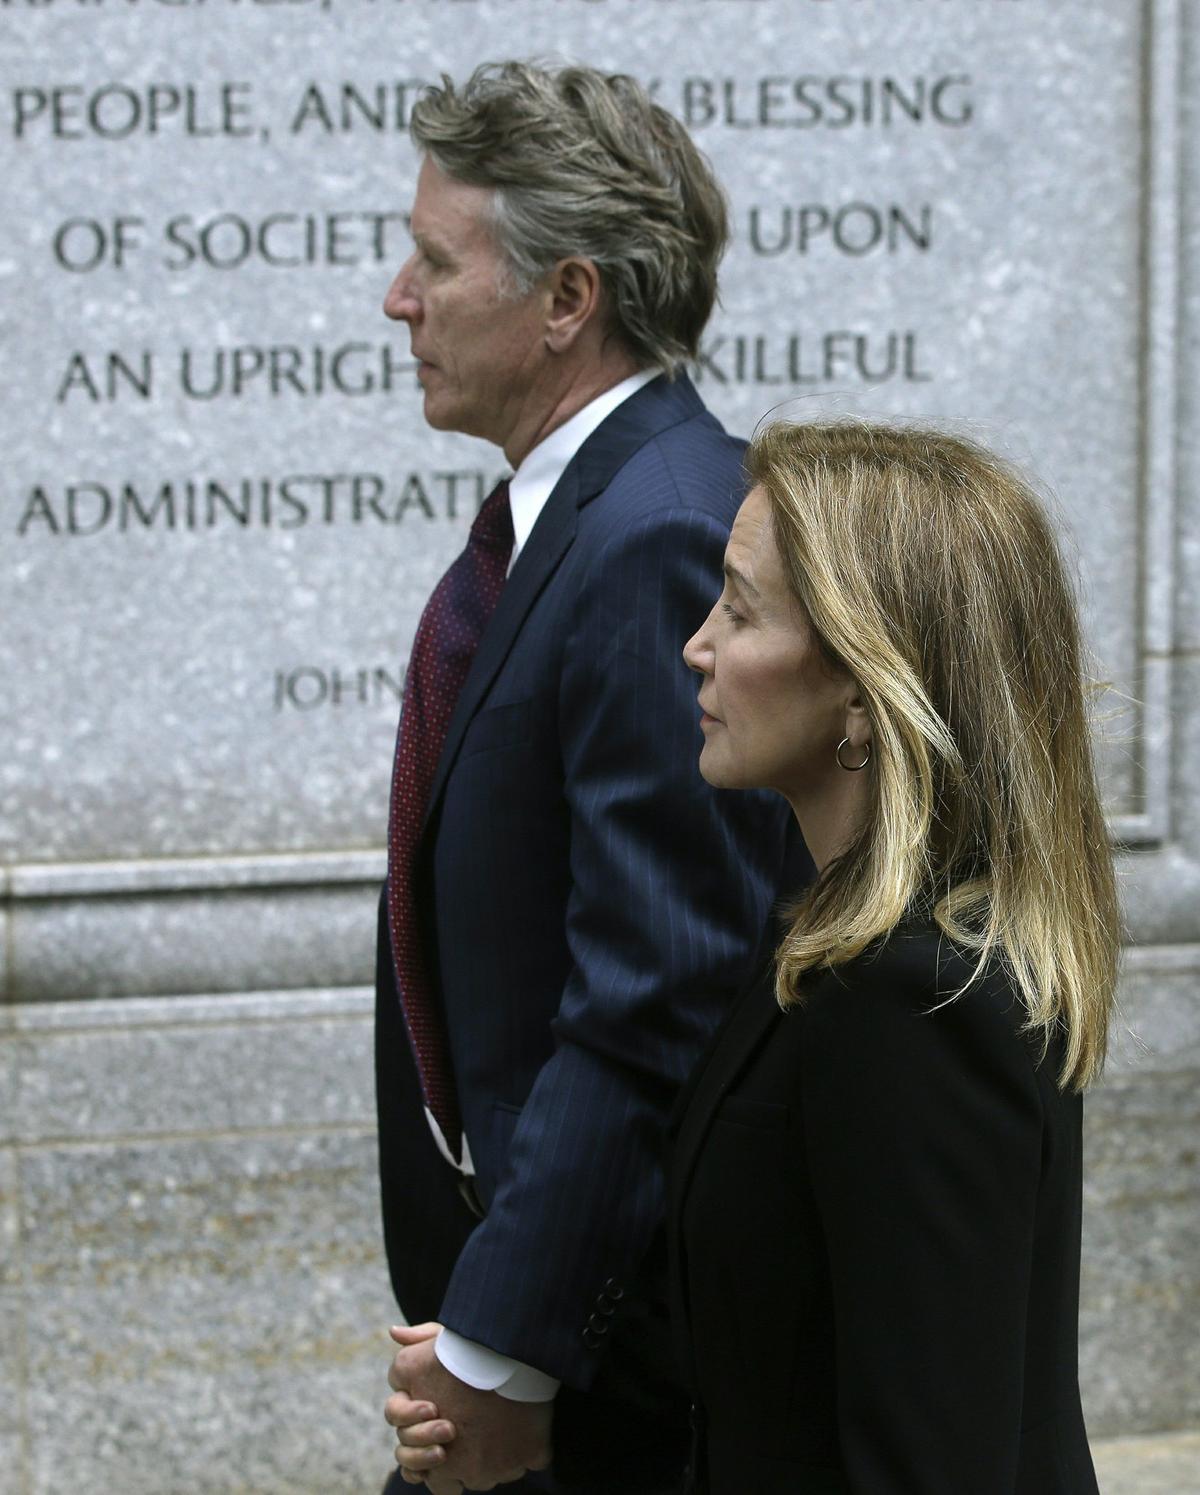 Actress Felicity Huffman arrives with her brother Moore Huffman Jr., at federal court in Boston, where she is scheduled to plead guilty to charges in a nationwide college admissions bribery scandal, on May 13, 2019. (Steven Senne/AP Photo)